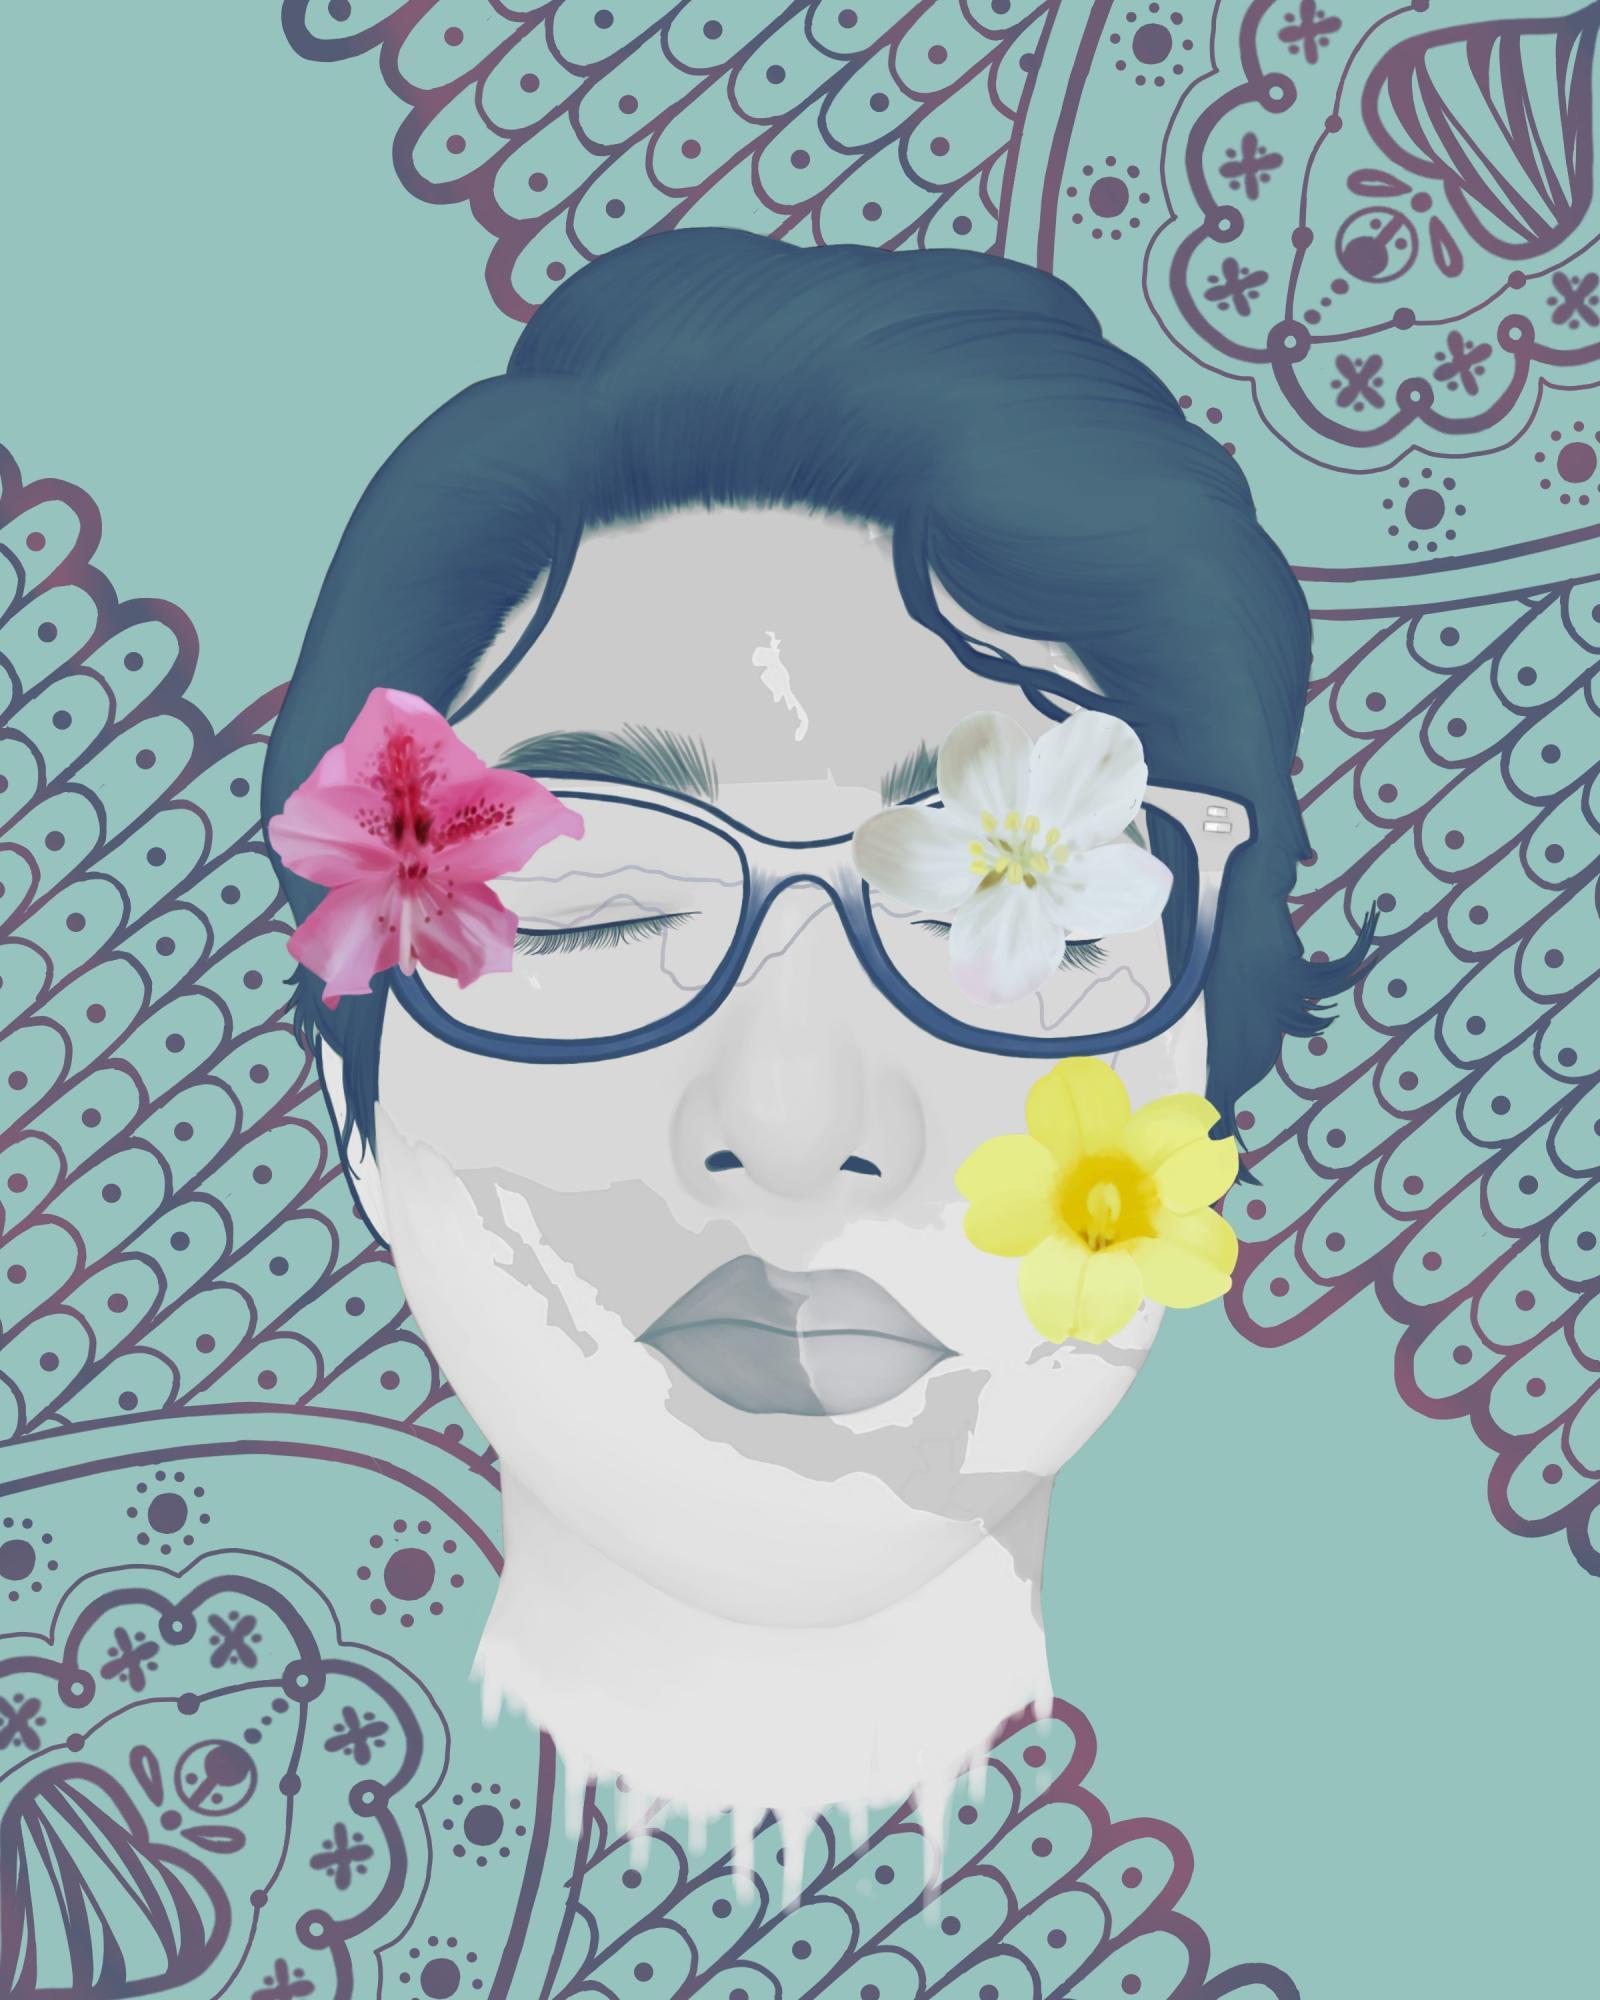 A digital artwork of a face with flowers on it.